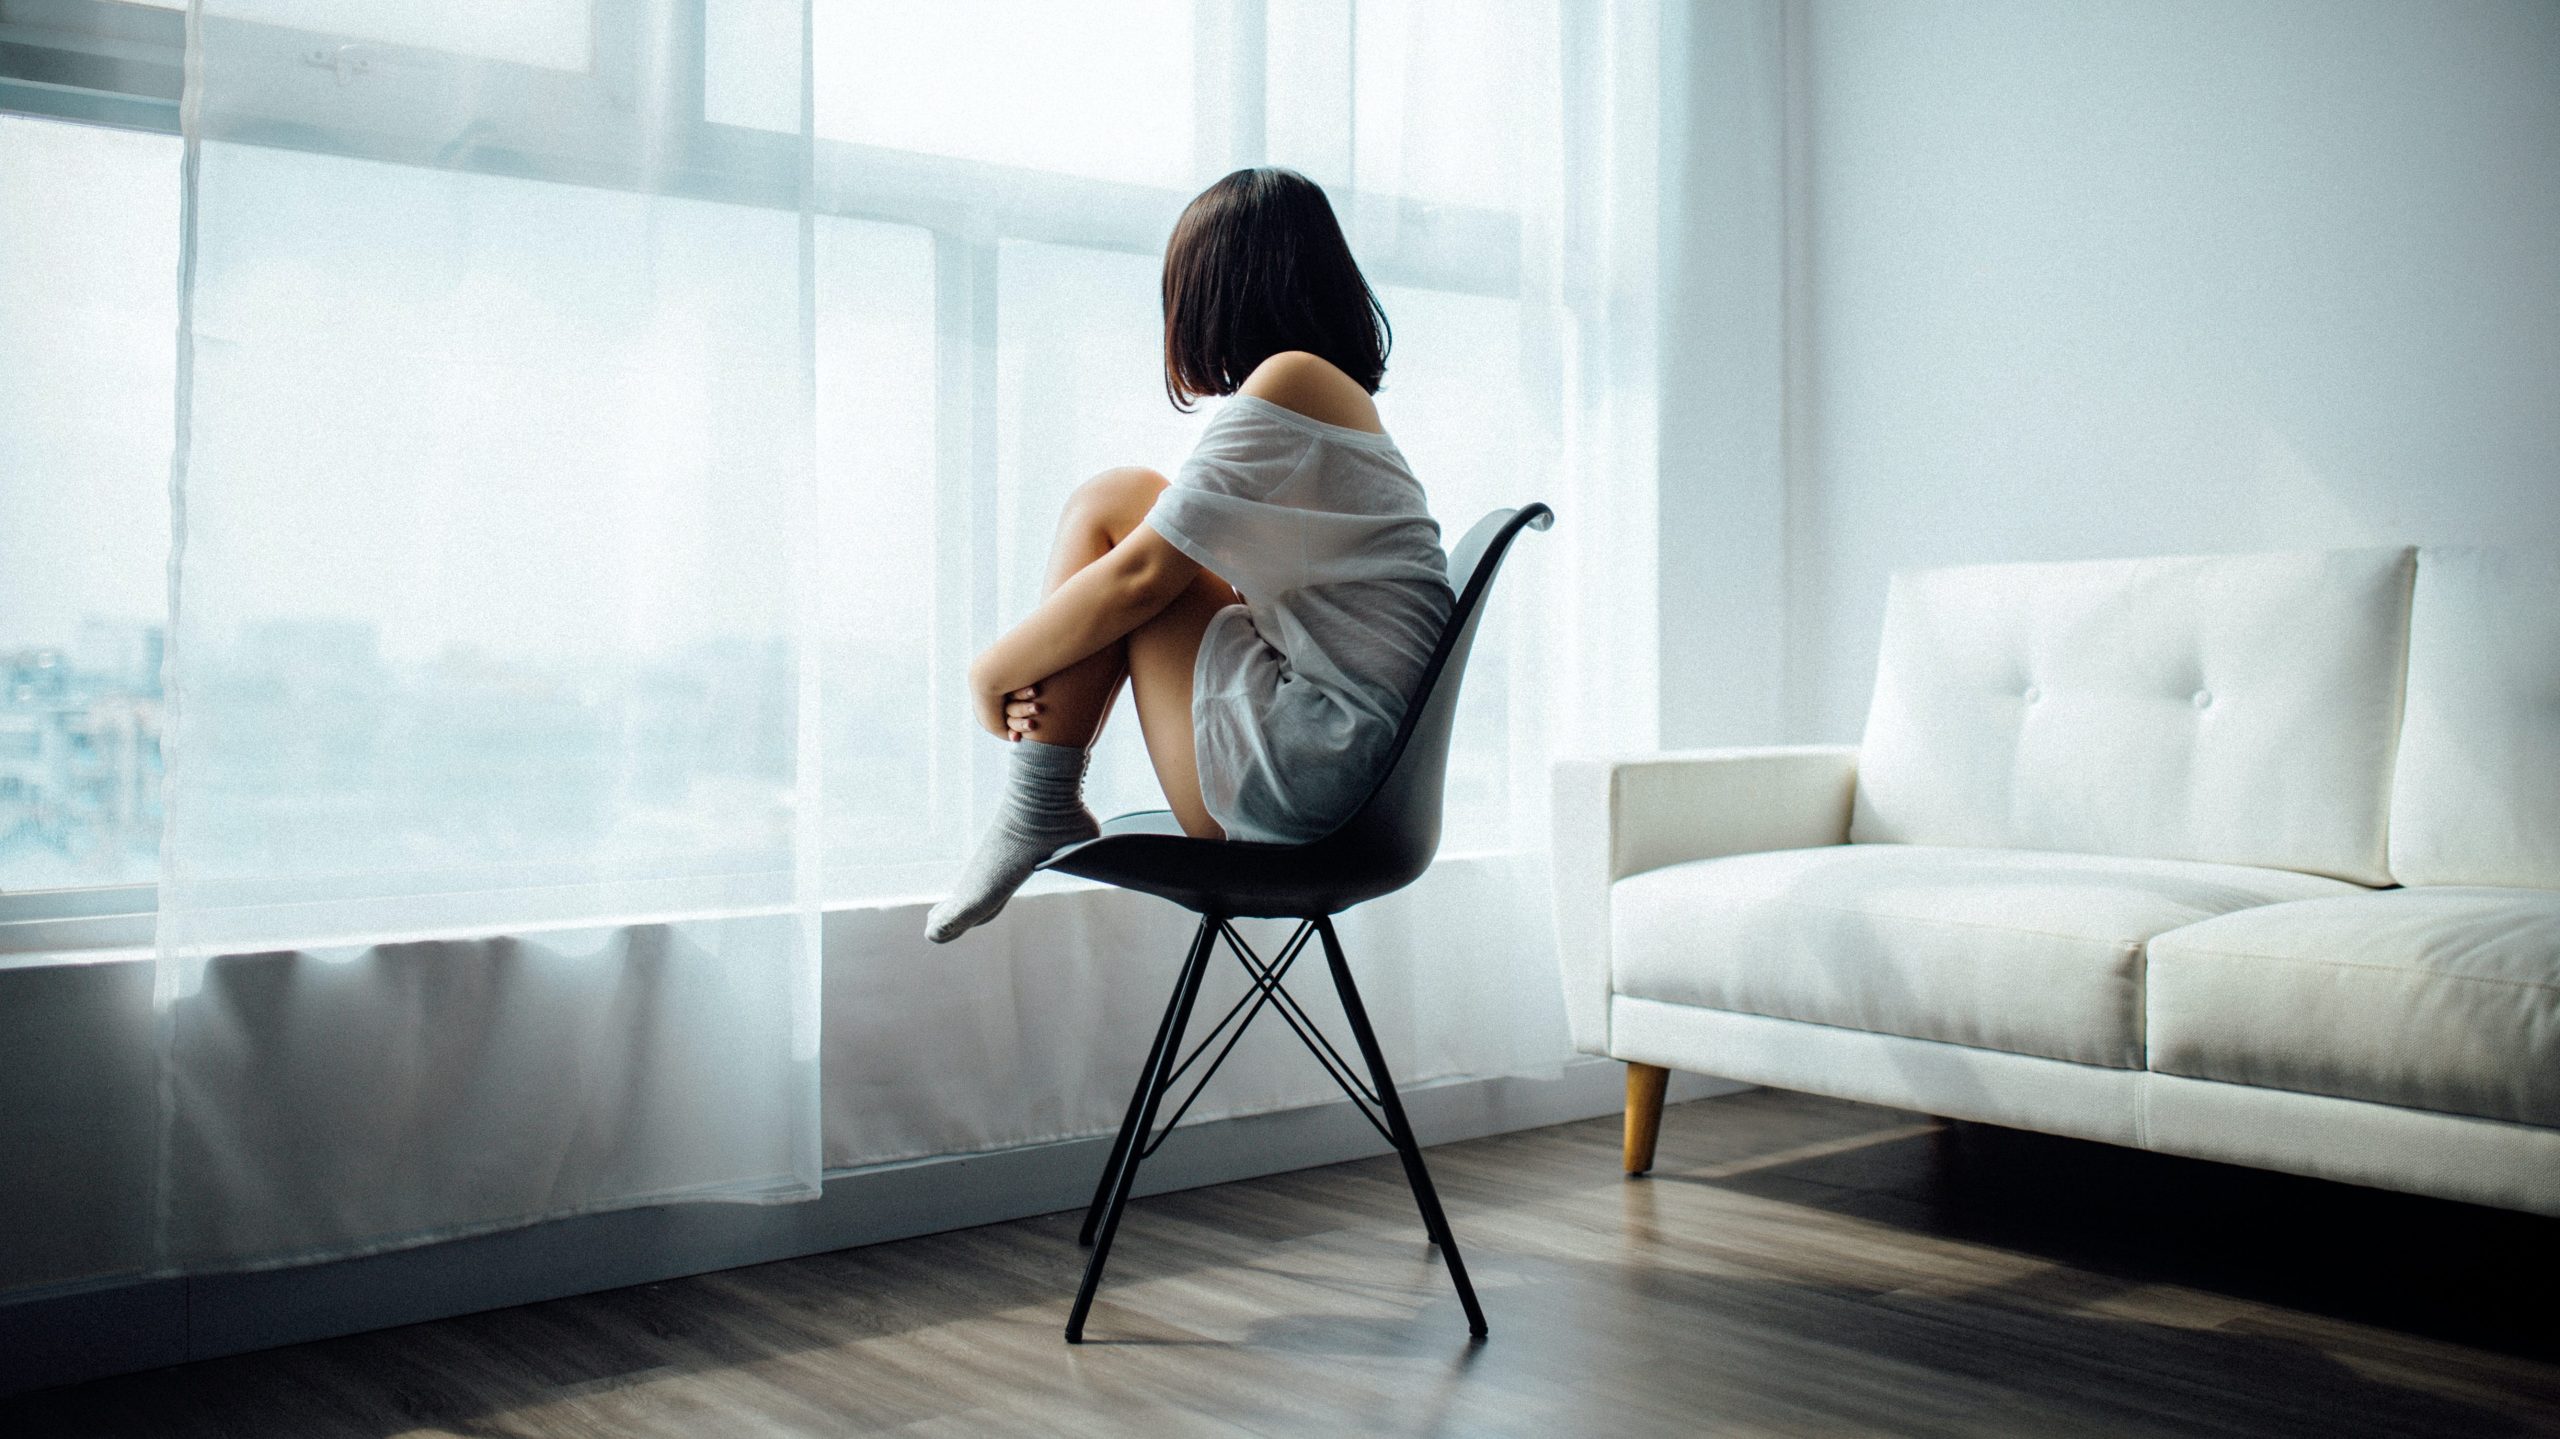 woman sitting on chair staring deeply